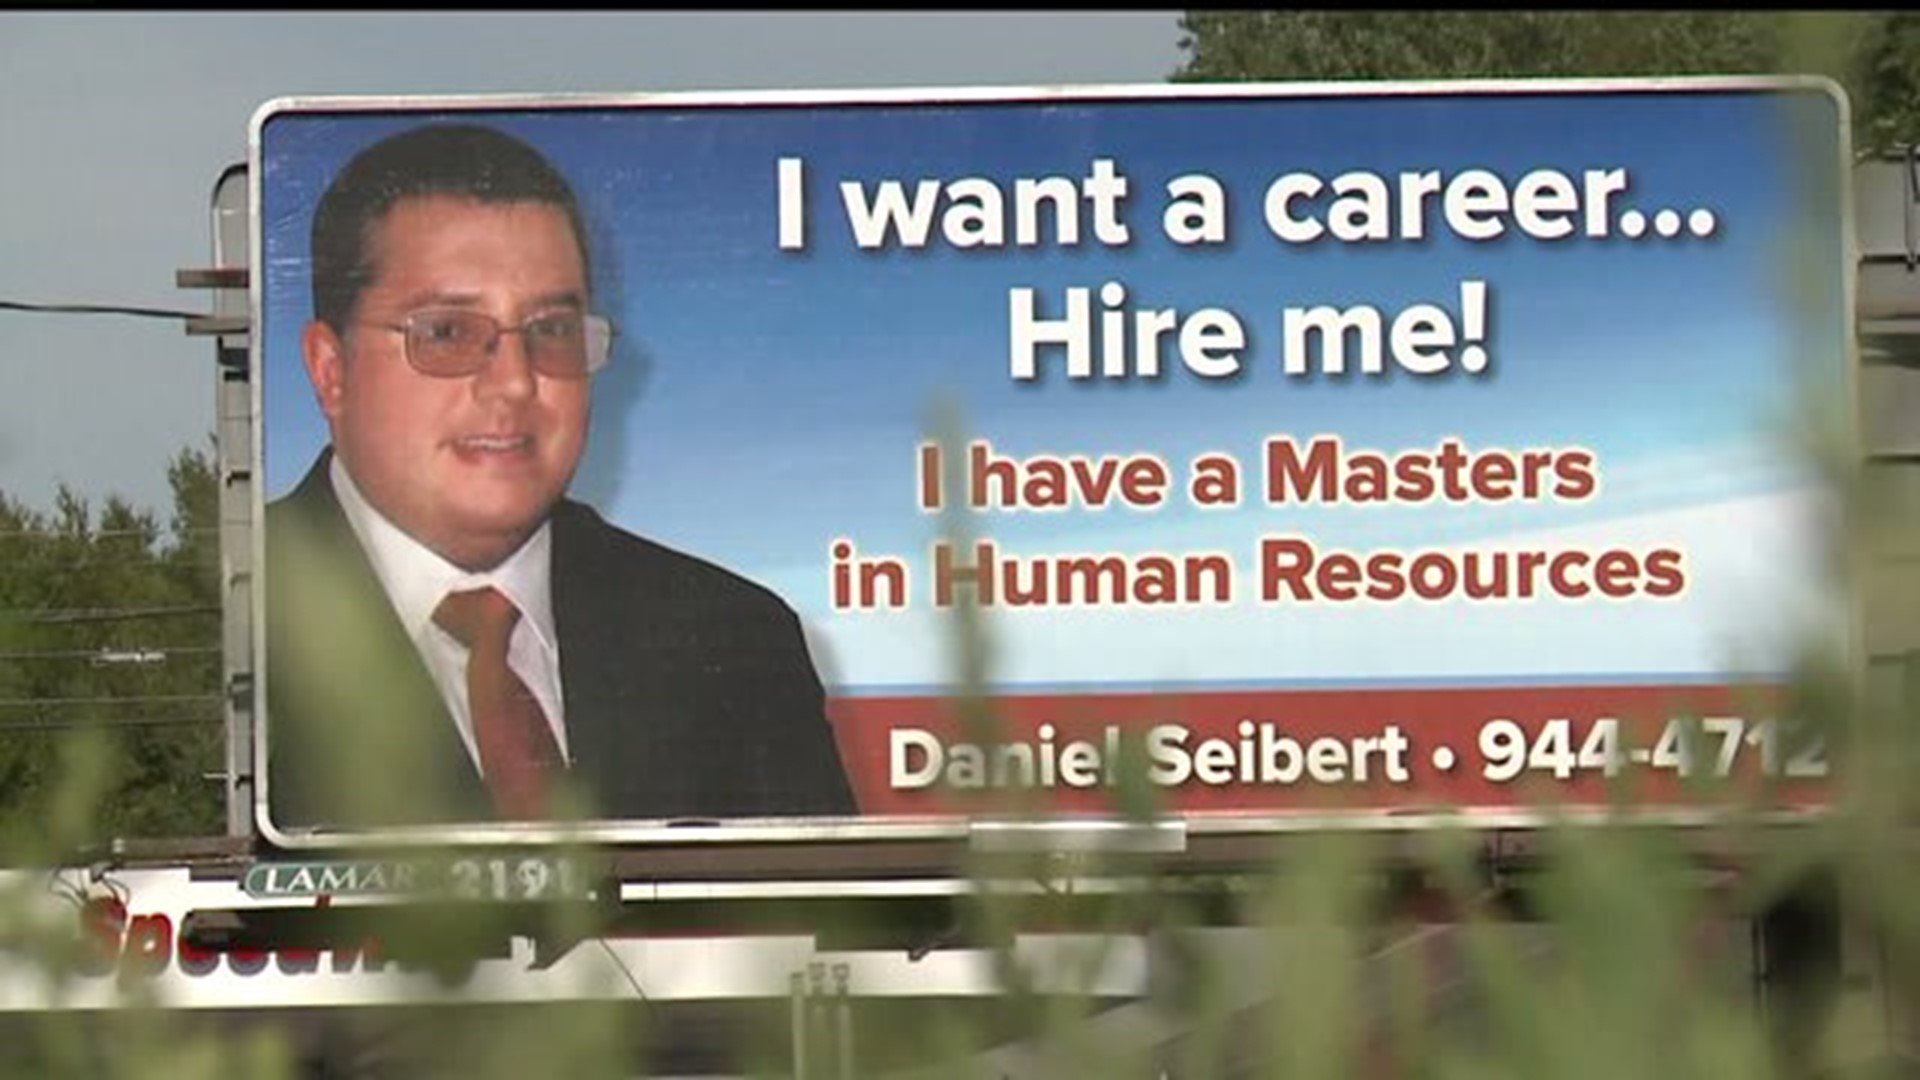 Middletown man uses billboard to boost job search